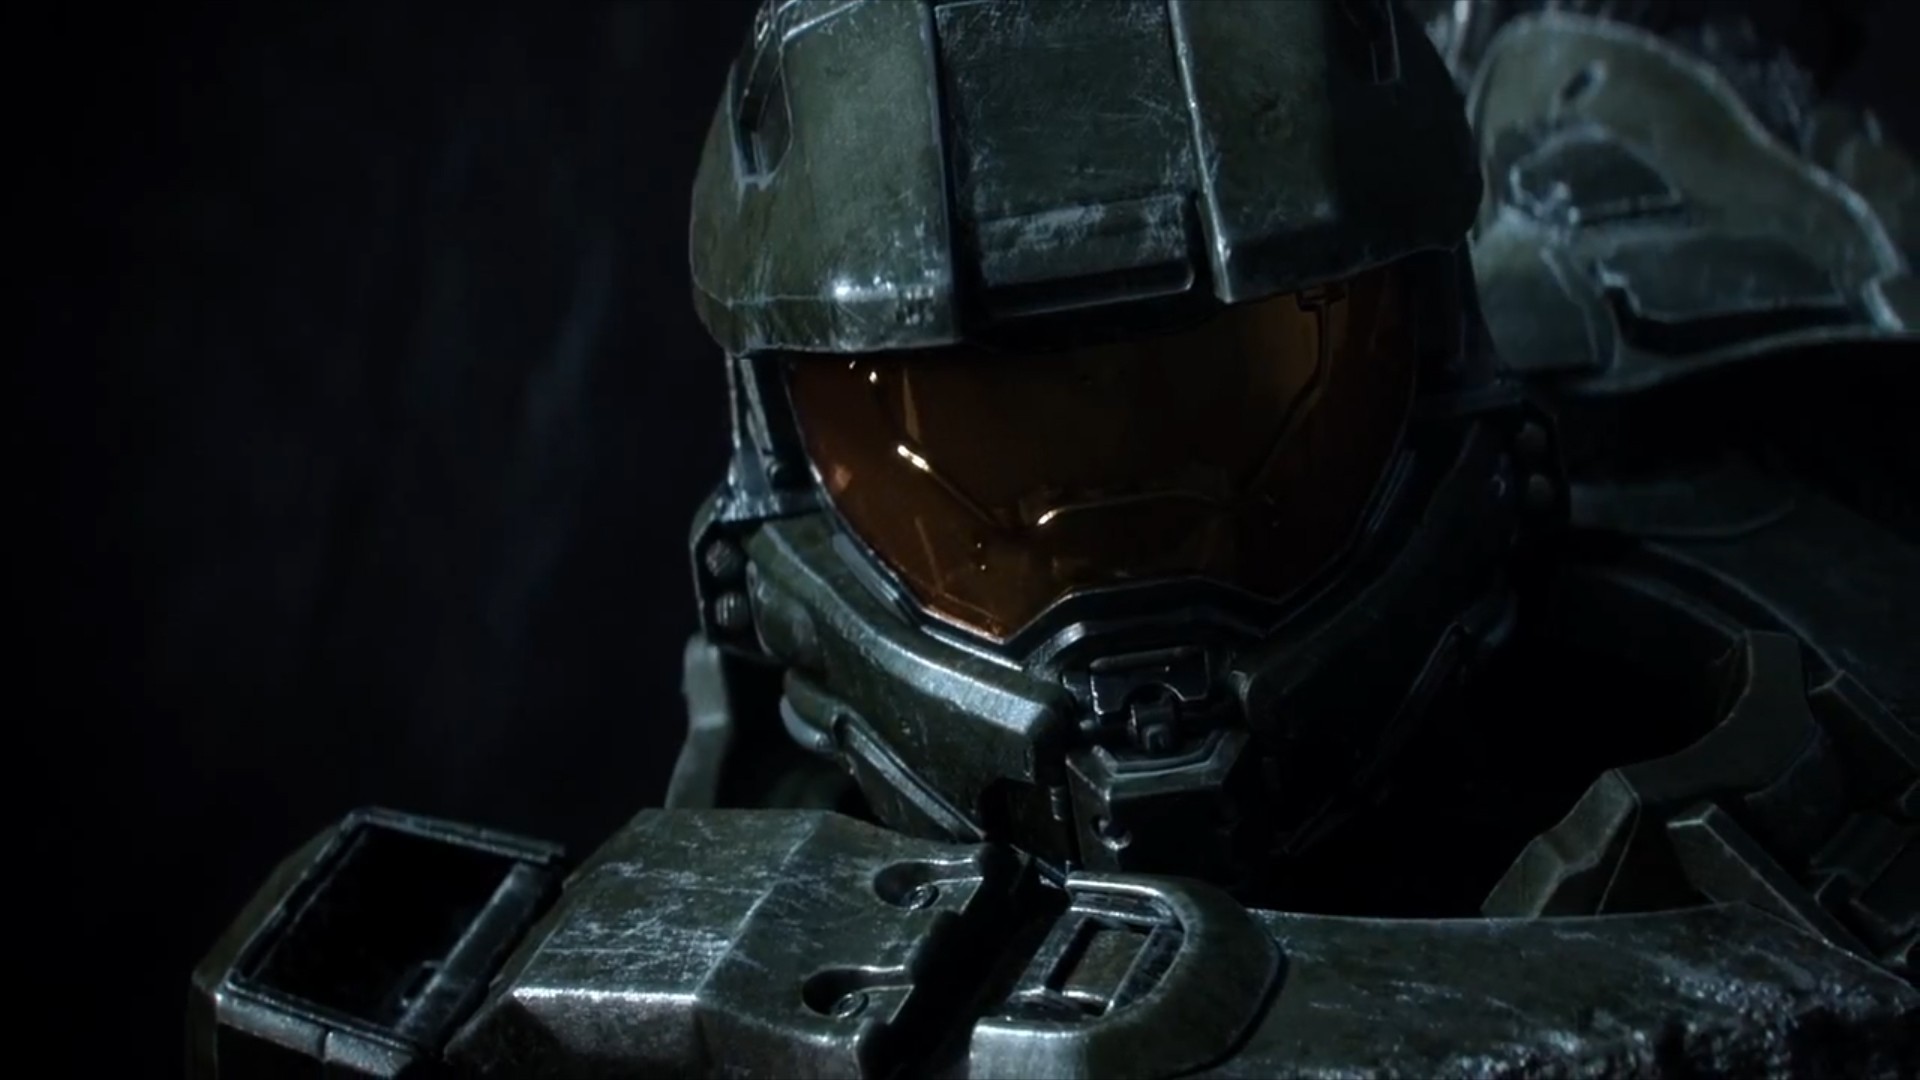 General 1920x1080 Halo 4 video games Master Chief (Halo) armor helmet video game characters science fiction